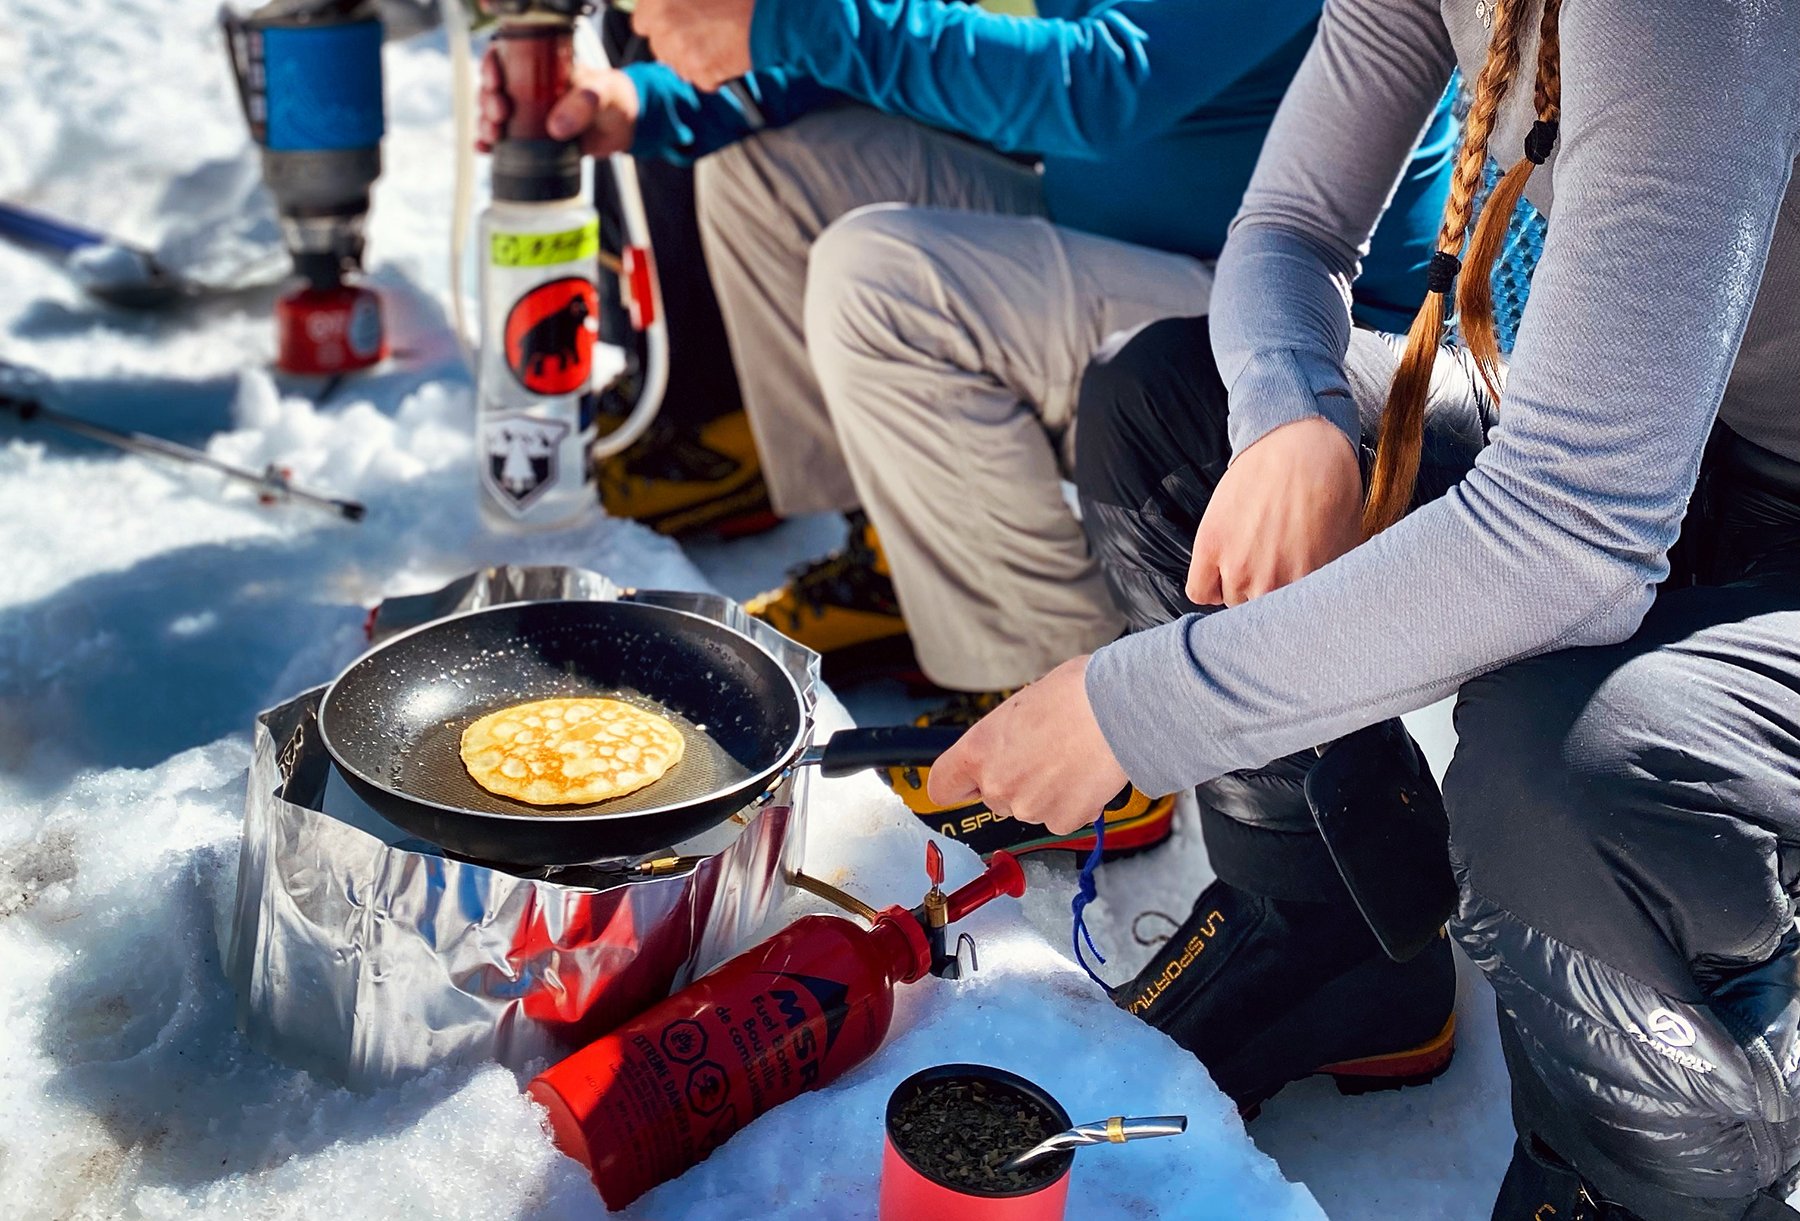 12 Snacks to Keep You Fueled on Your Ice Fishing Adventure